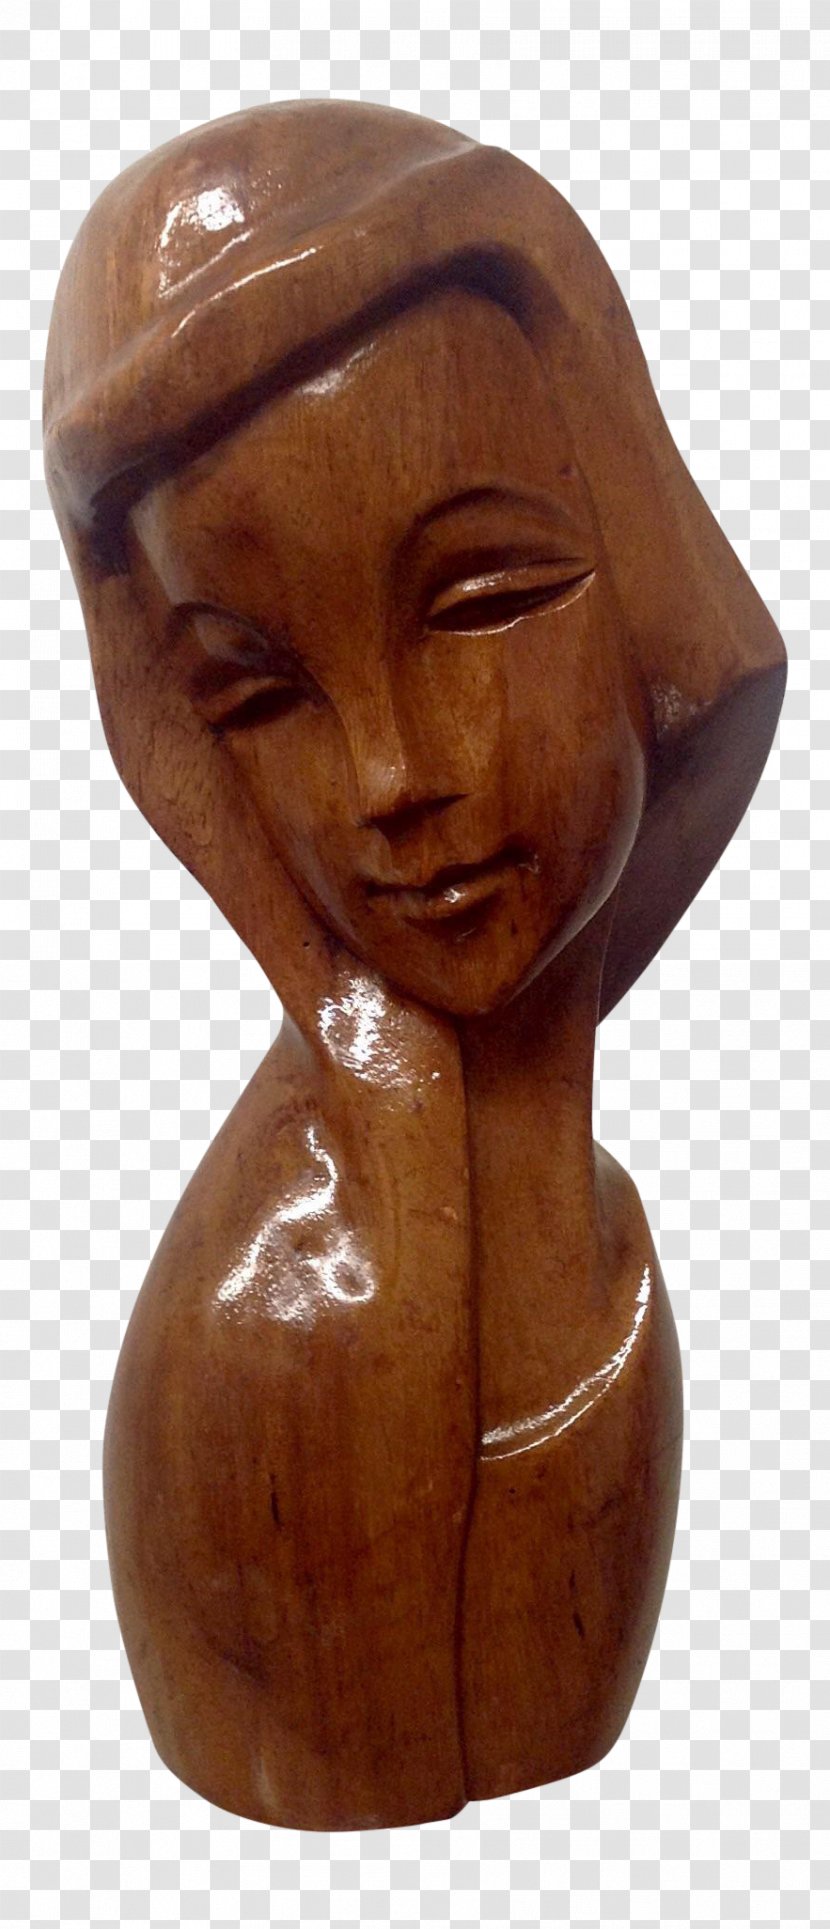 Figurine - Woodcarving Transparent PNG